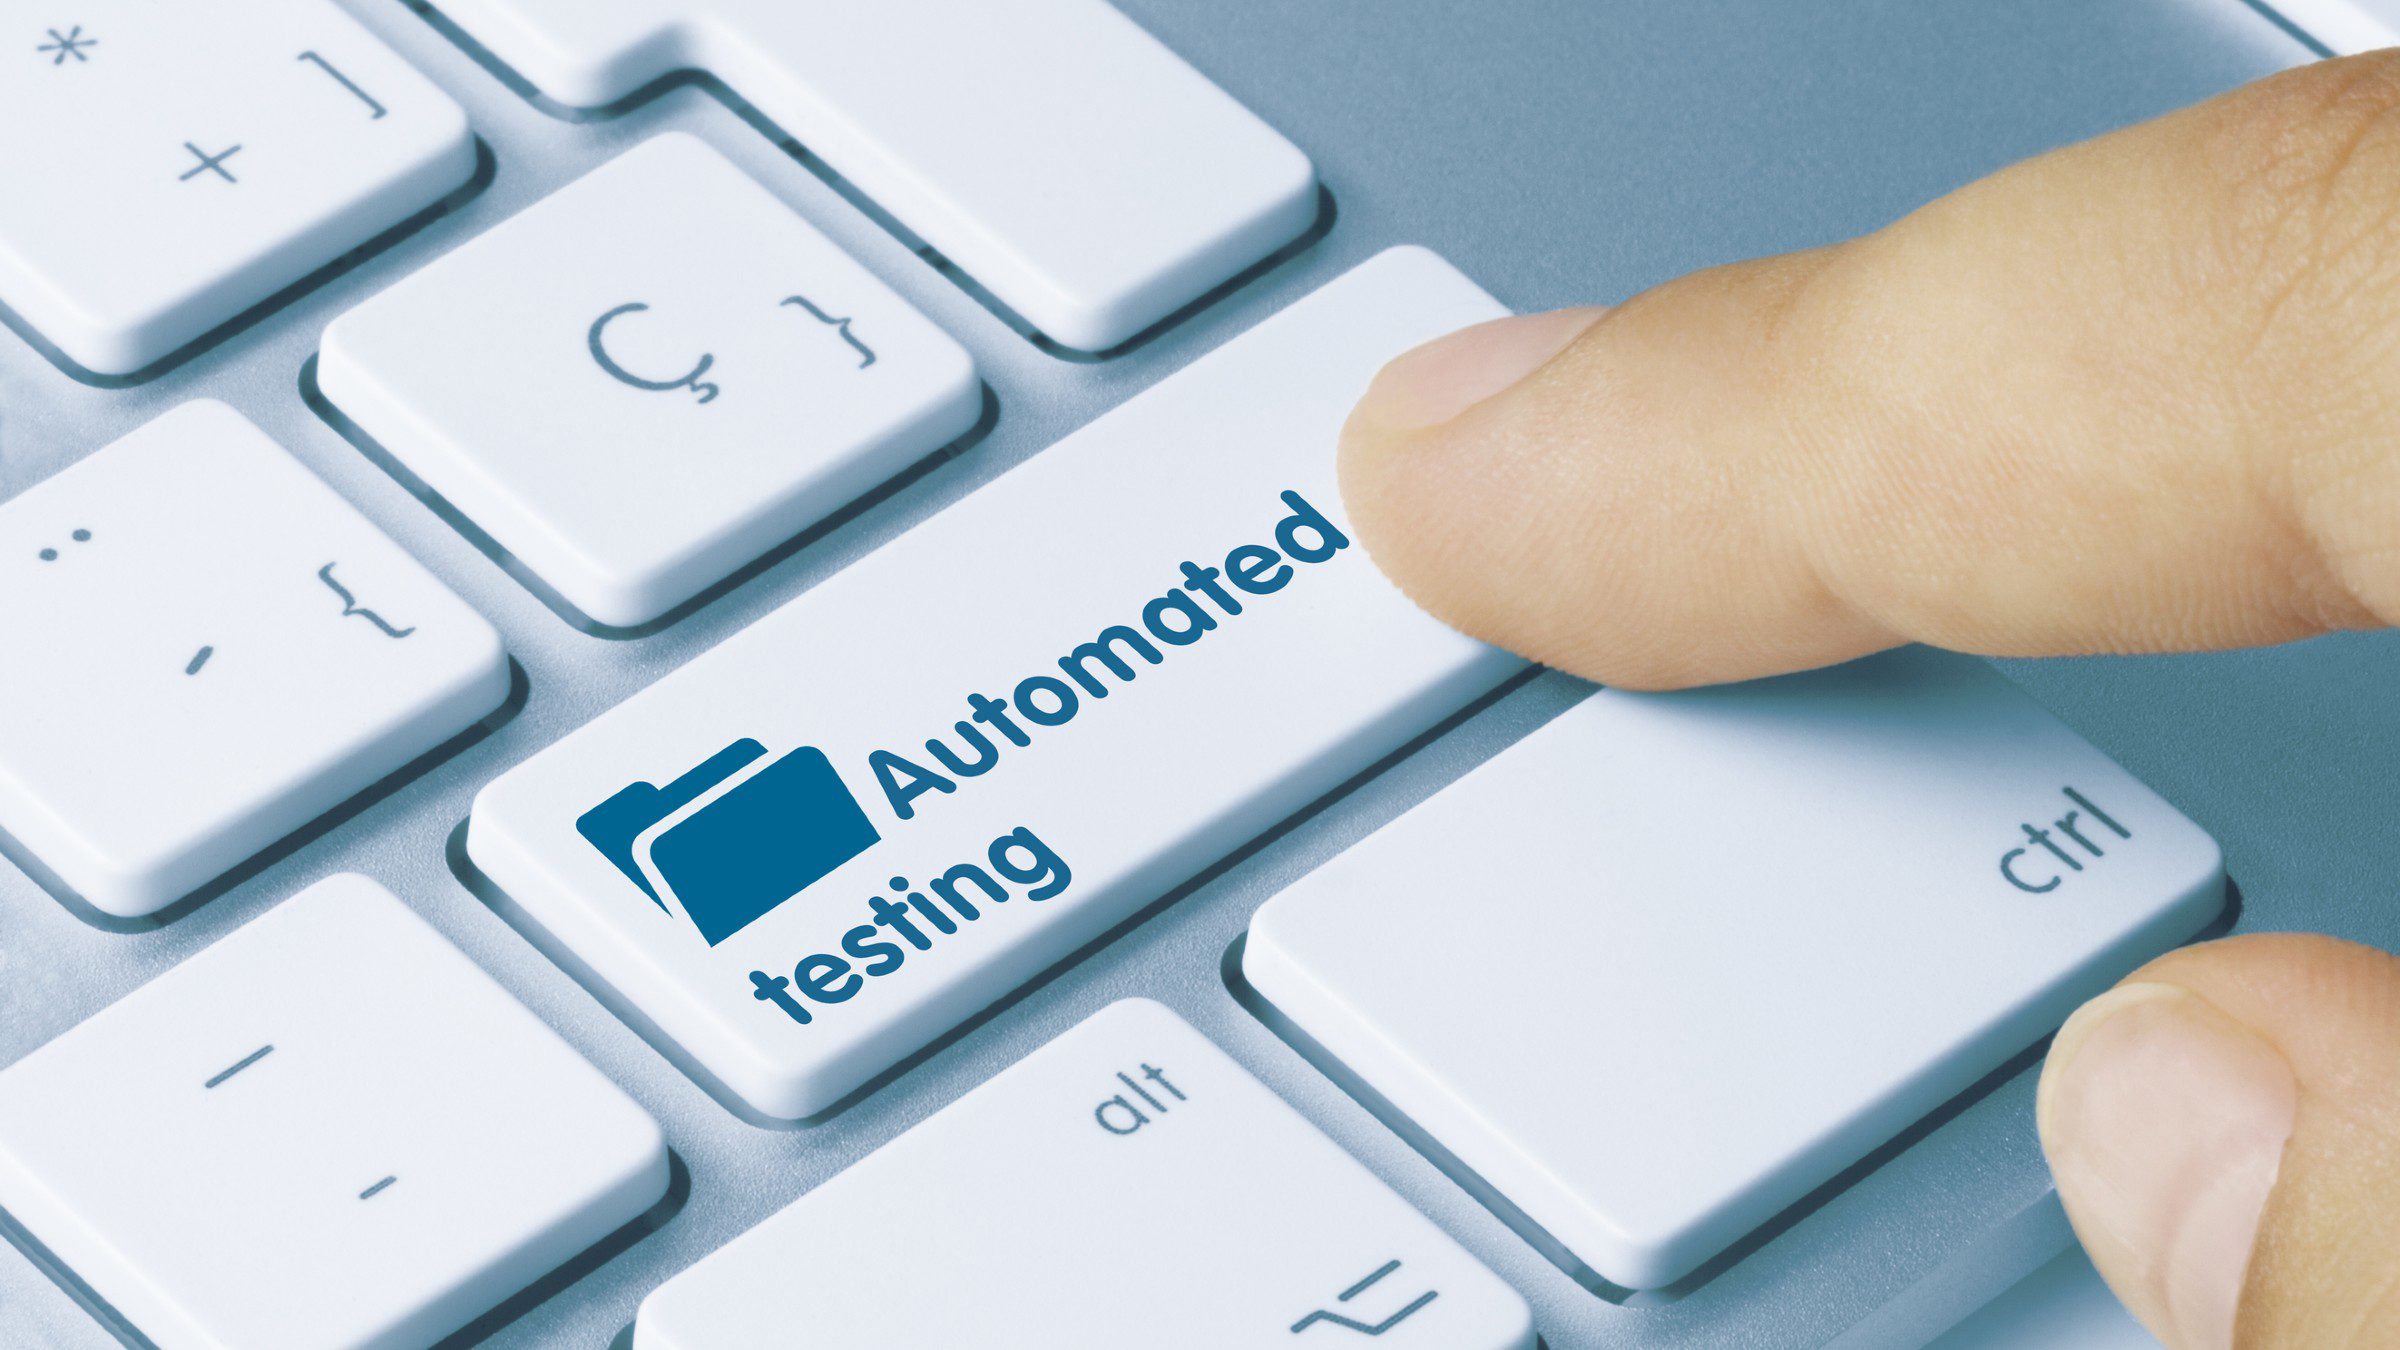 Automated Testing